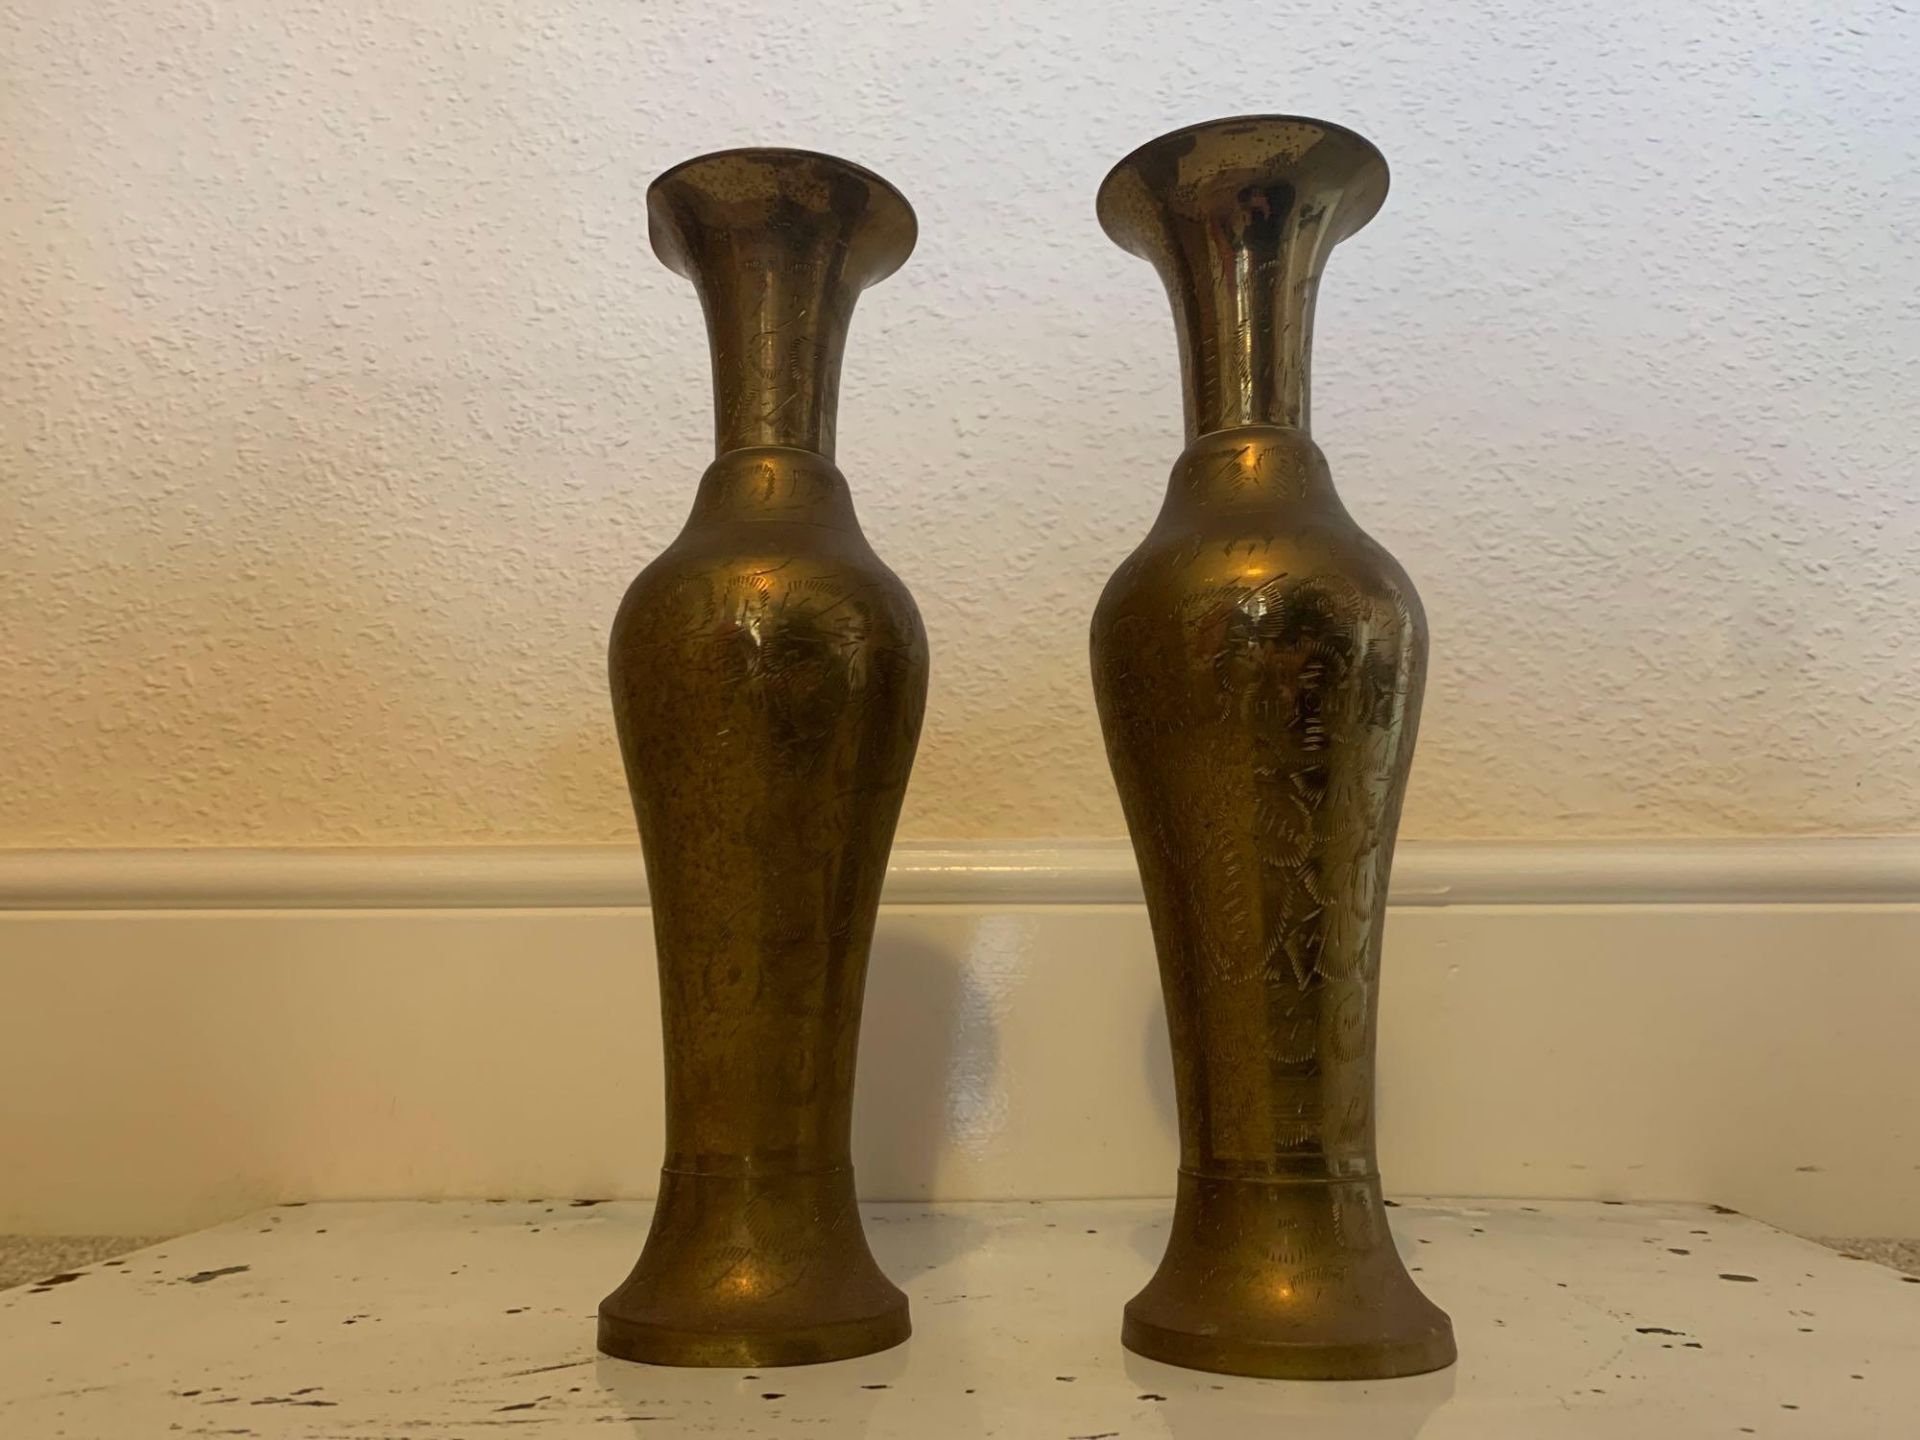 A Pair Of Vintage Etched Brass Baluster Vases Each At 30cm Tall - Image 4 of 5